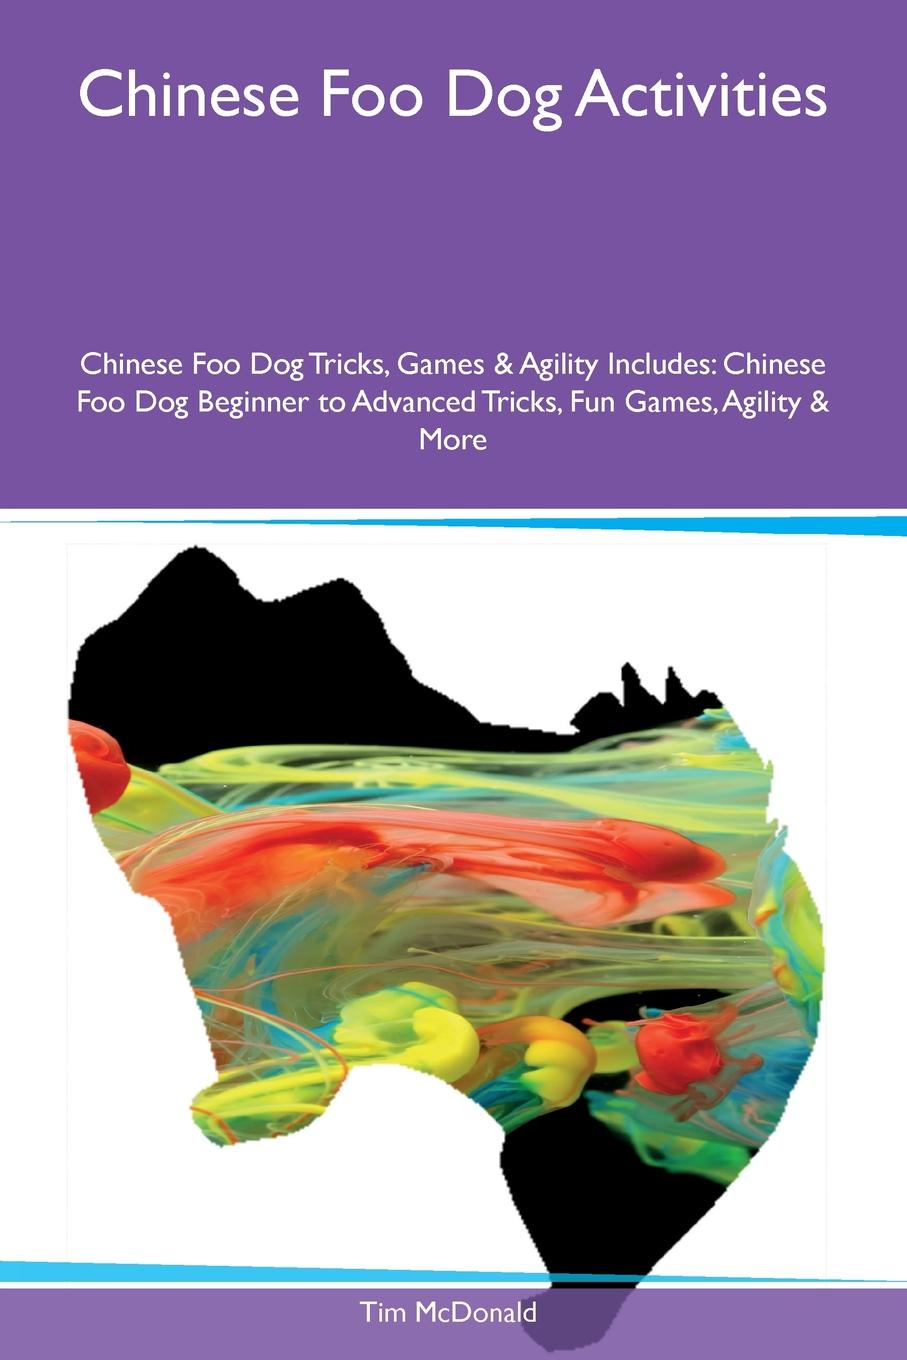 Chinese Foo Dog Activities Chinese Foo Dog Tricks, Games & Agility Includes. Chinese Foo Dog Beginner to Advanced Tricks, Fun Games, Agility & More